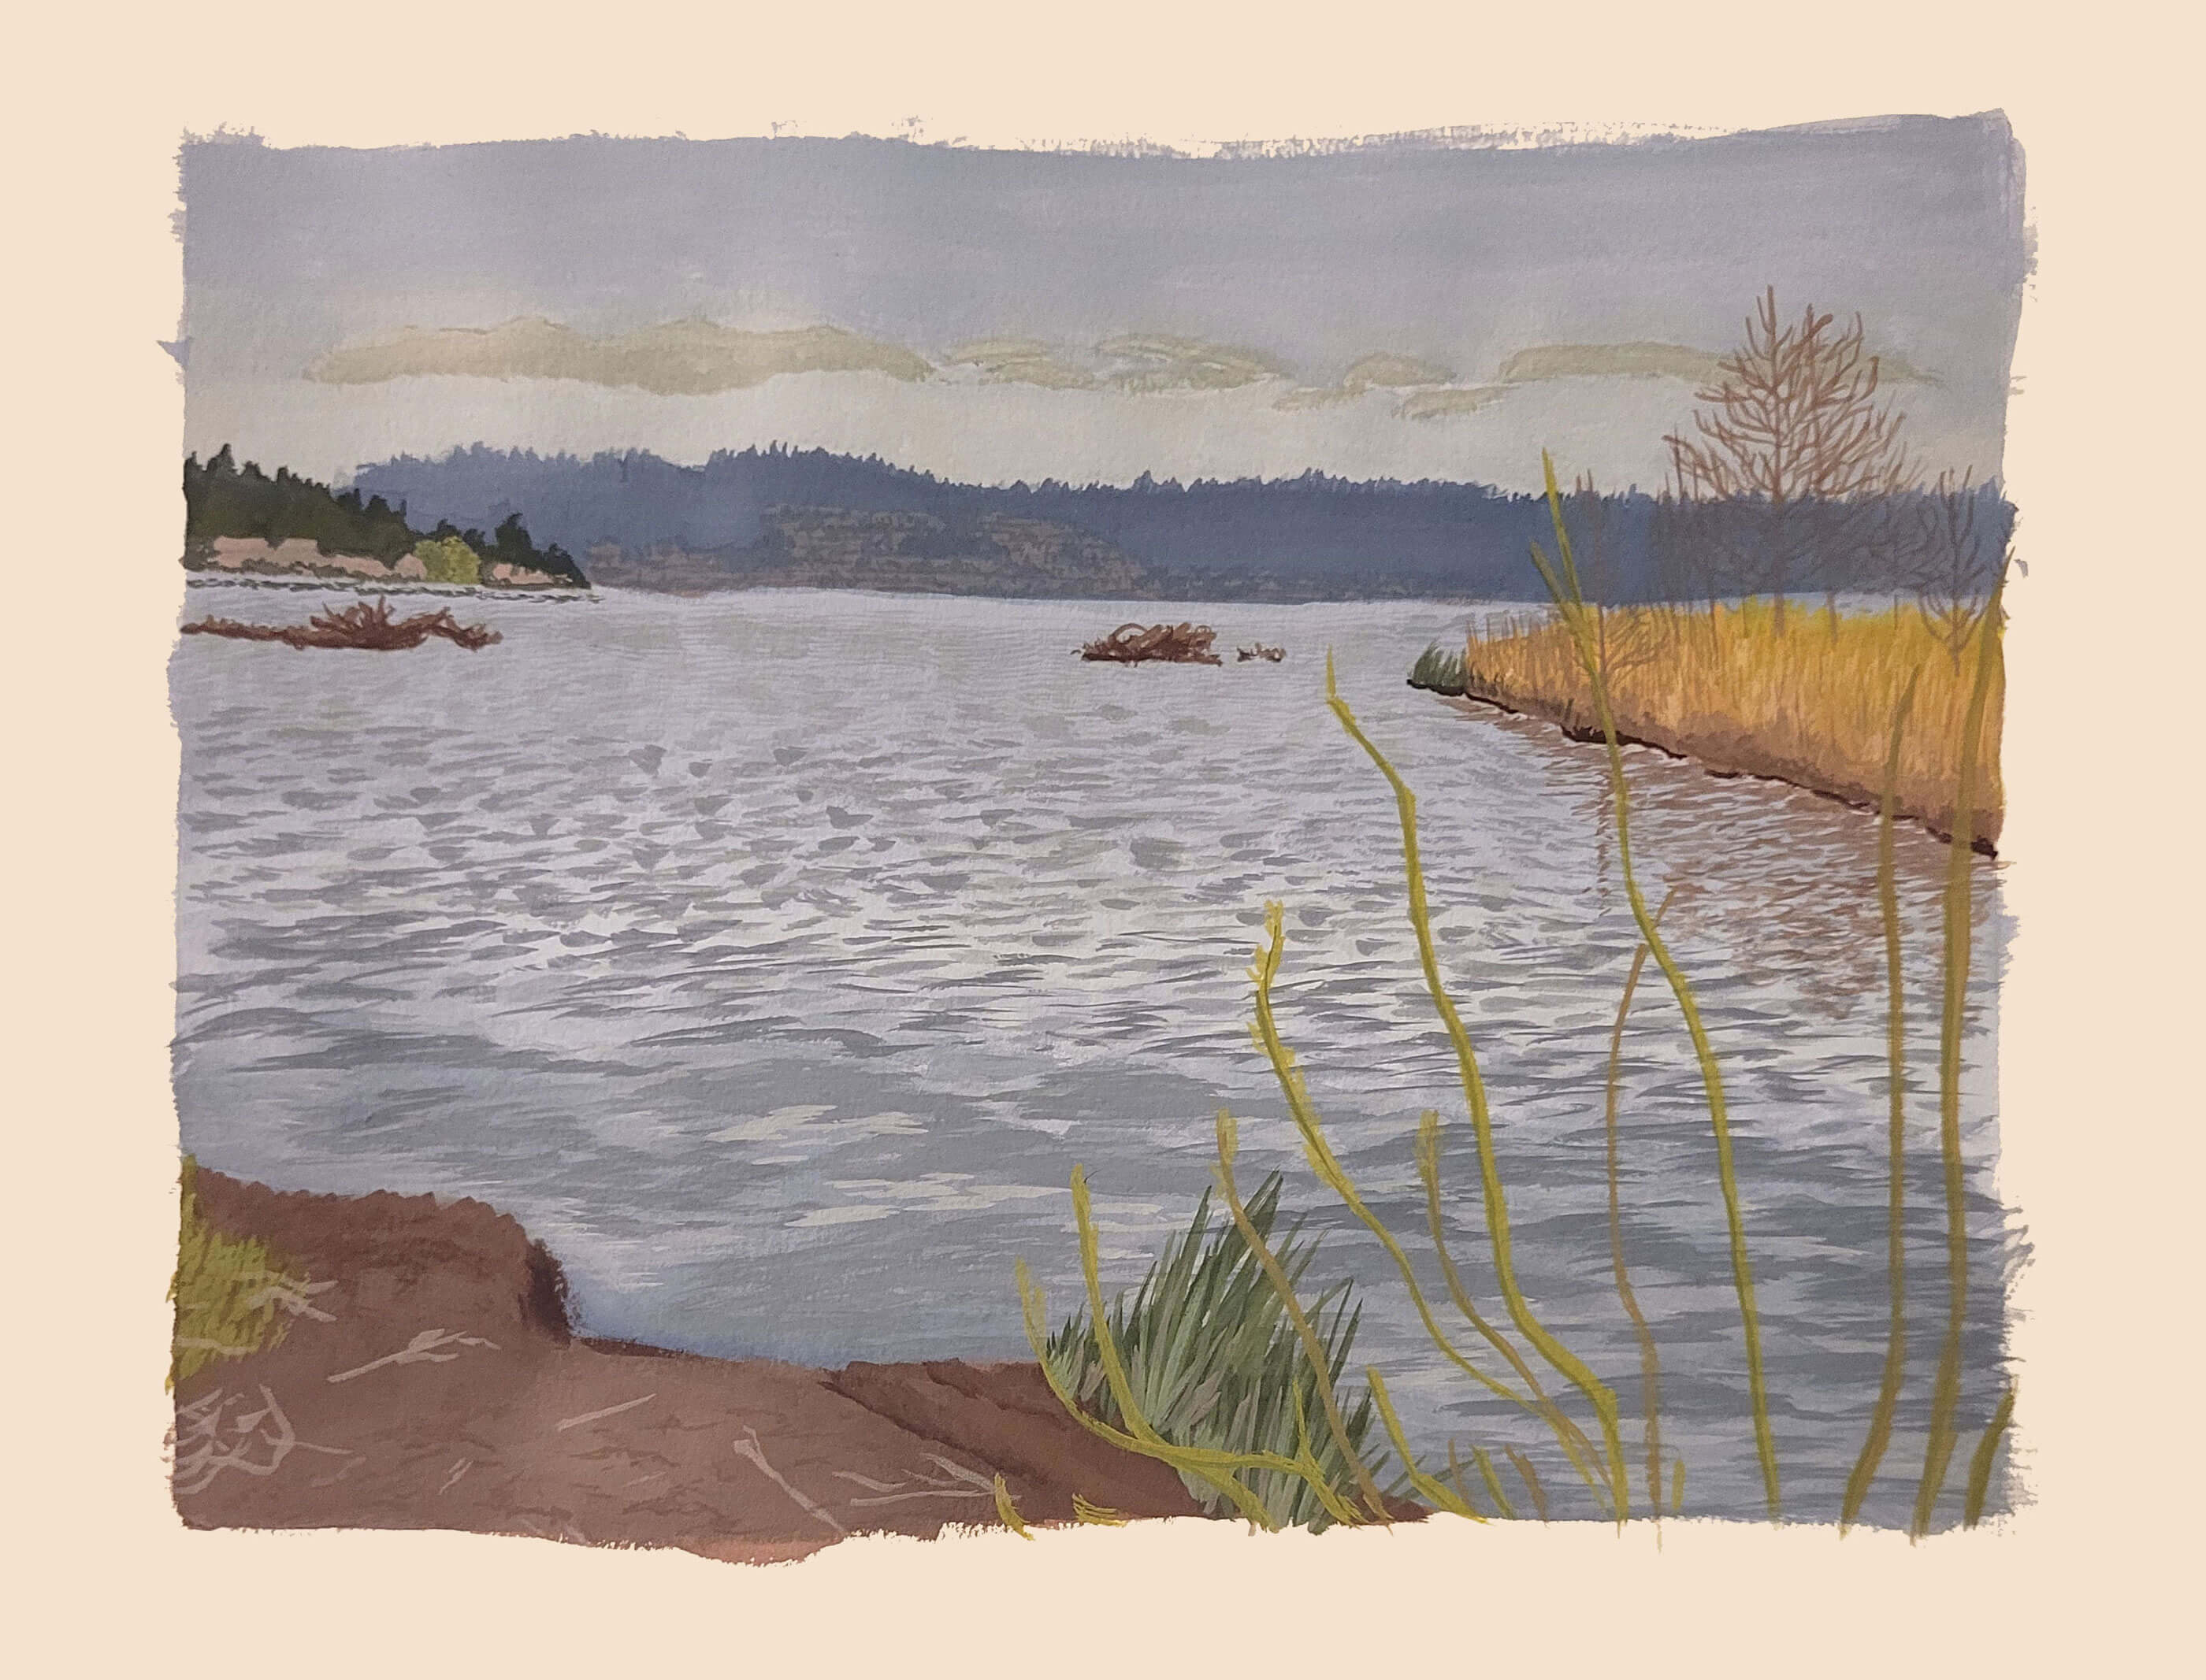 Painting of a lake surrounded by rocks and pine trees.